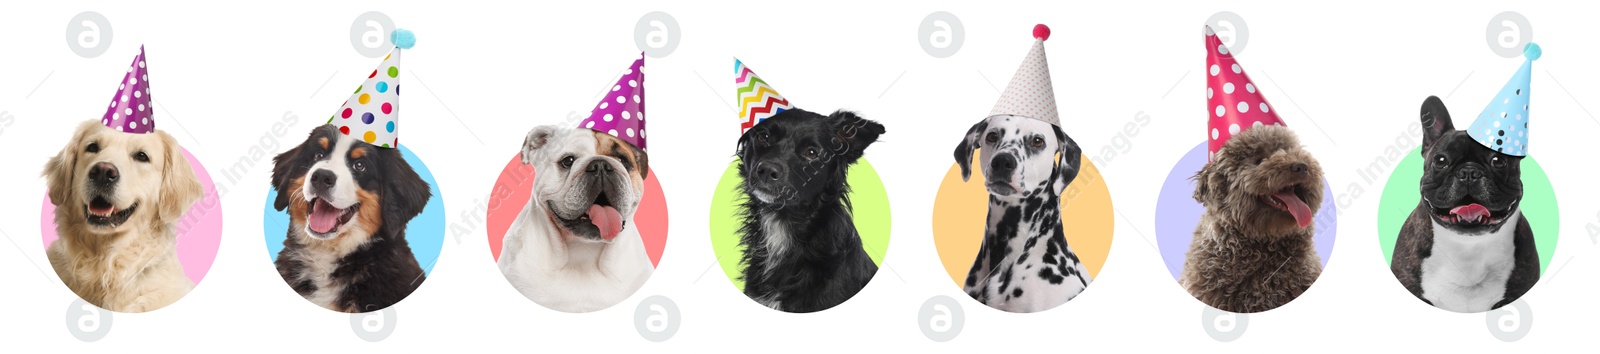 Image of Cute birthday dogs in party hats on white background, collage of portraits